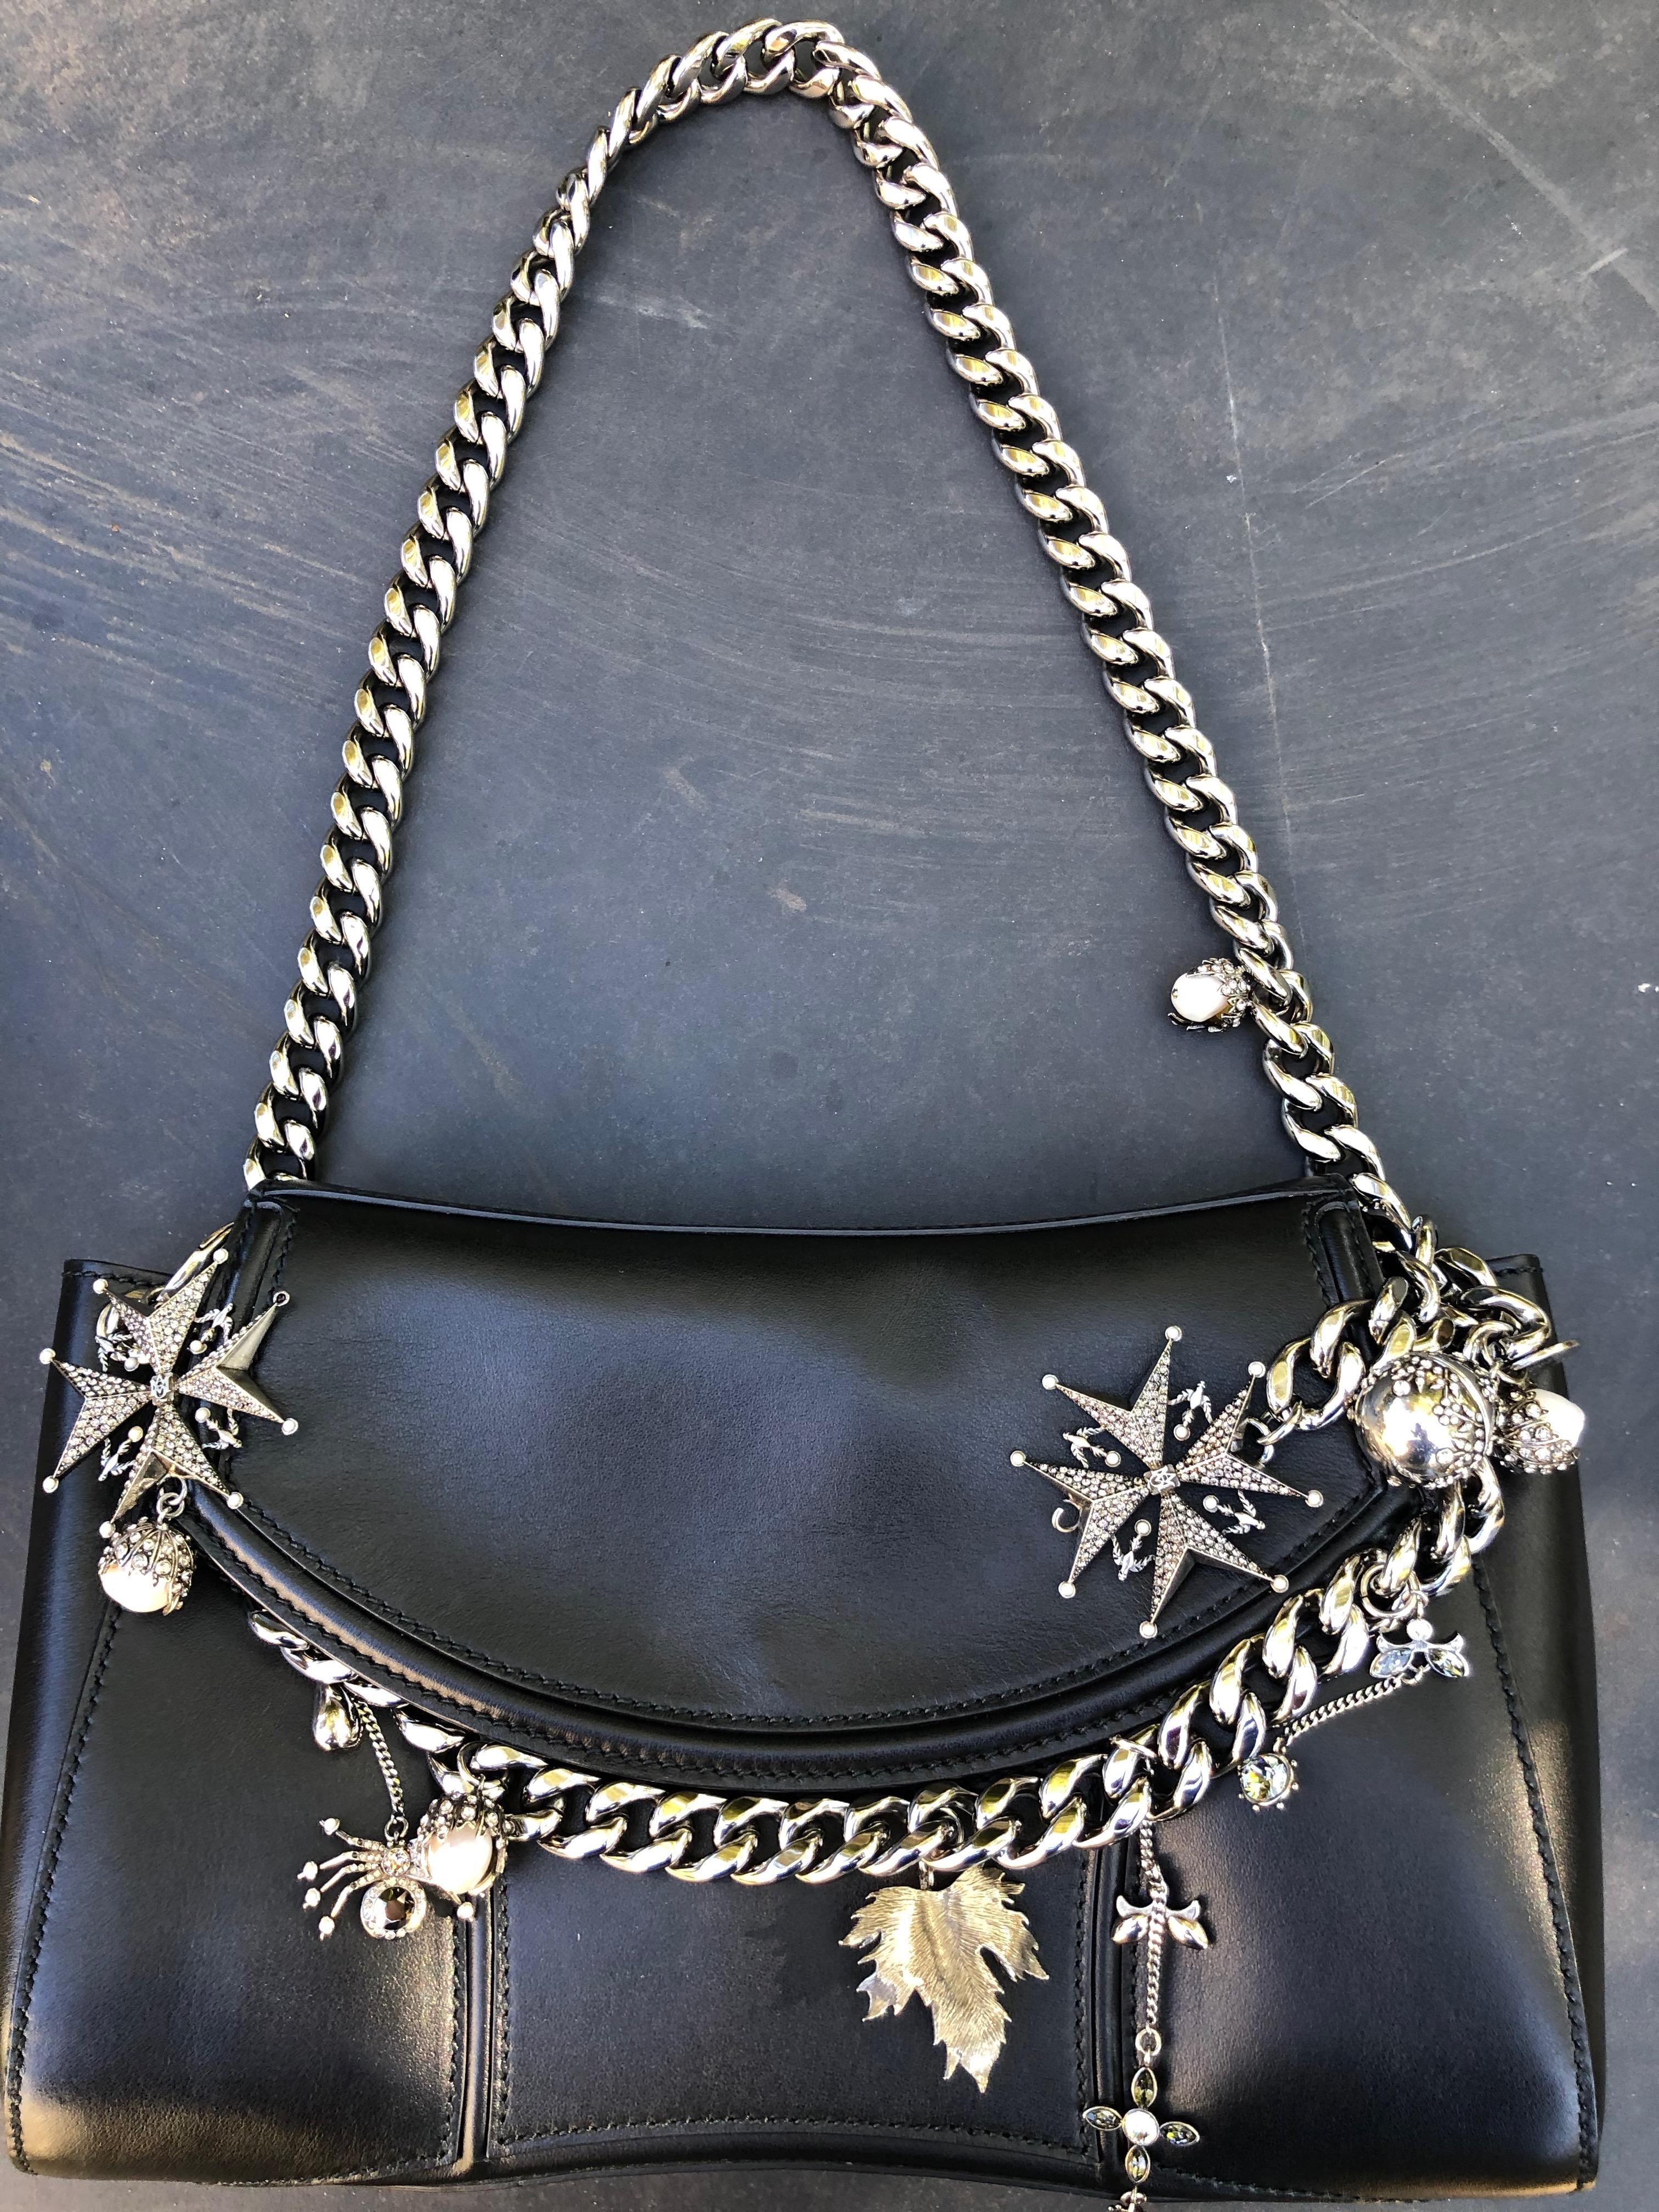 Alexander McQueen Black Medallion Leather Chain-Strap Shoulder Bag with Charms For Sale 8